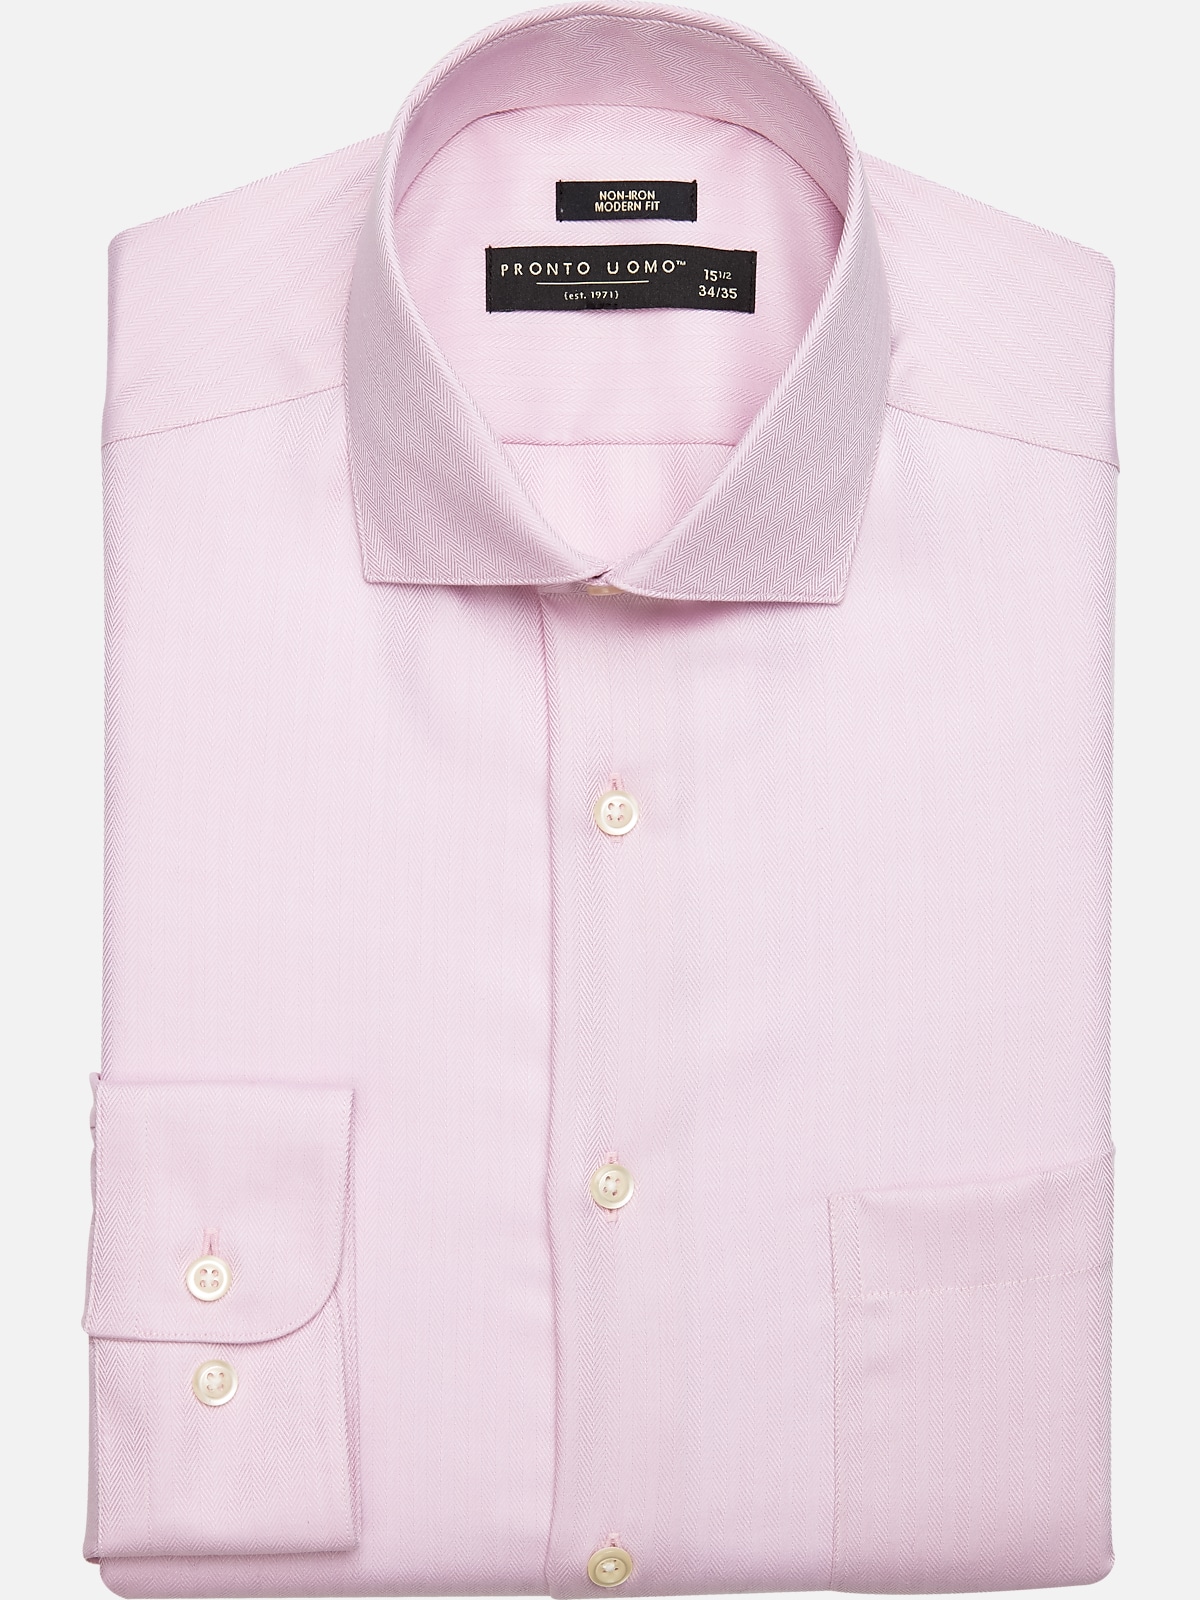 Pronto Uomo Modern Fit Spread Collar Dress Shirt | All Clearance $39.99 ...